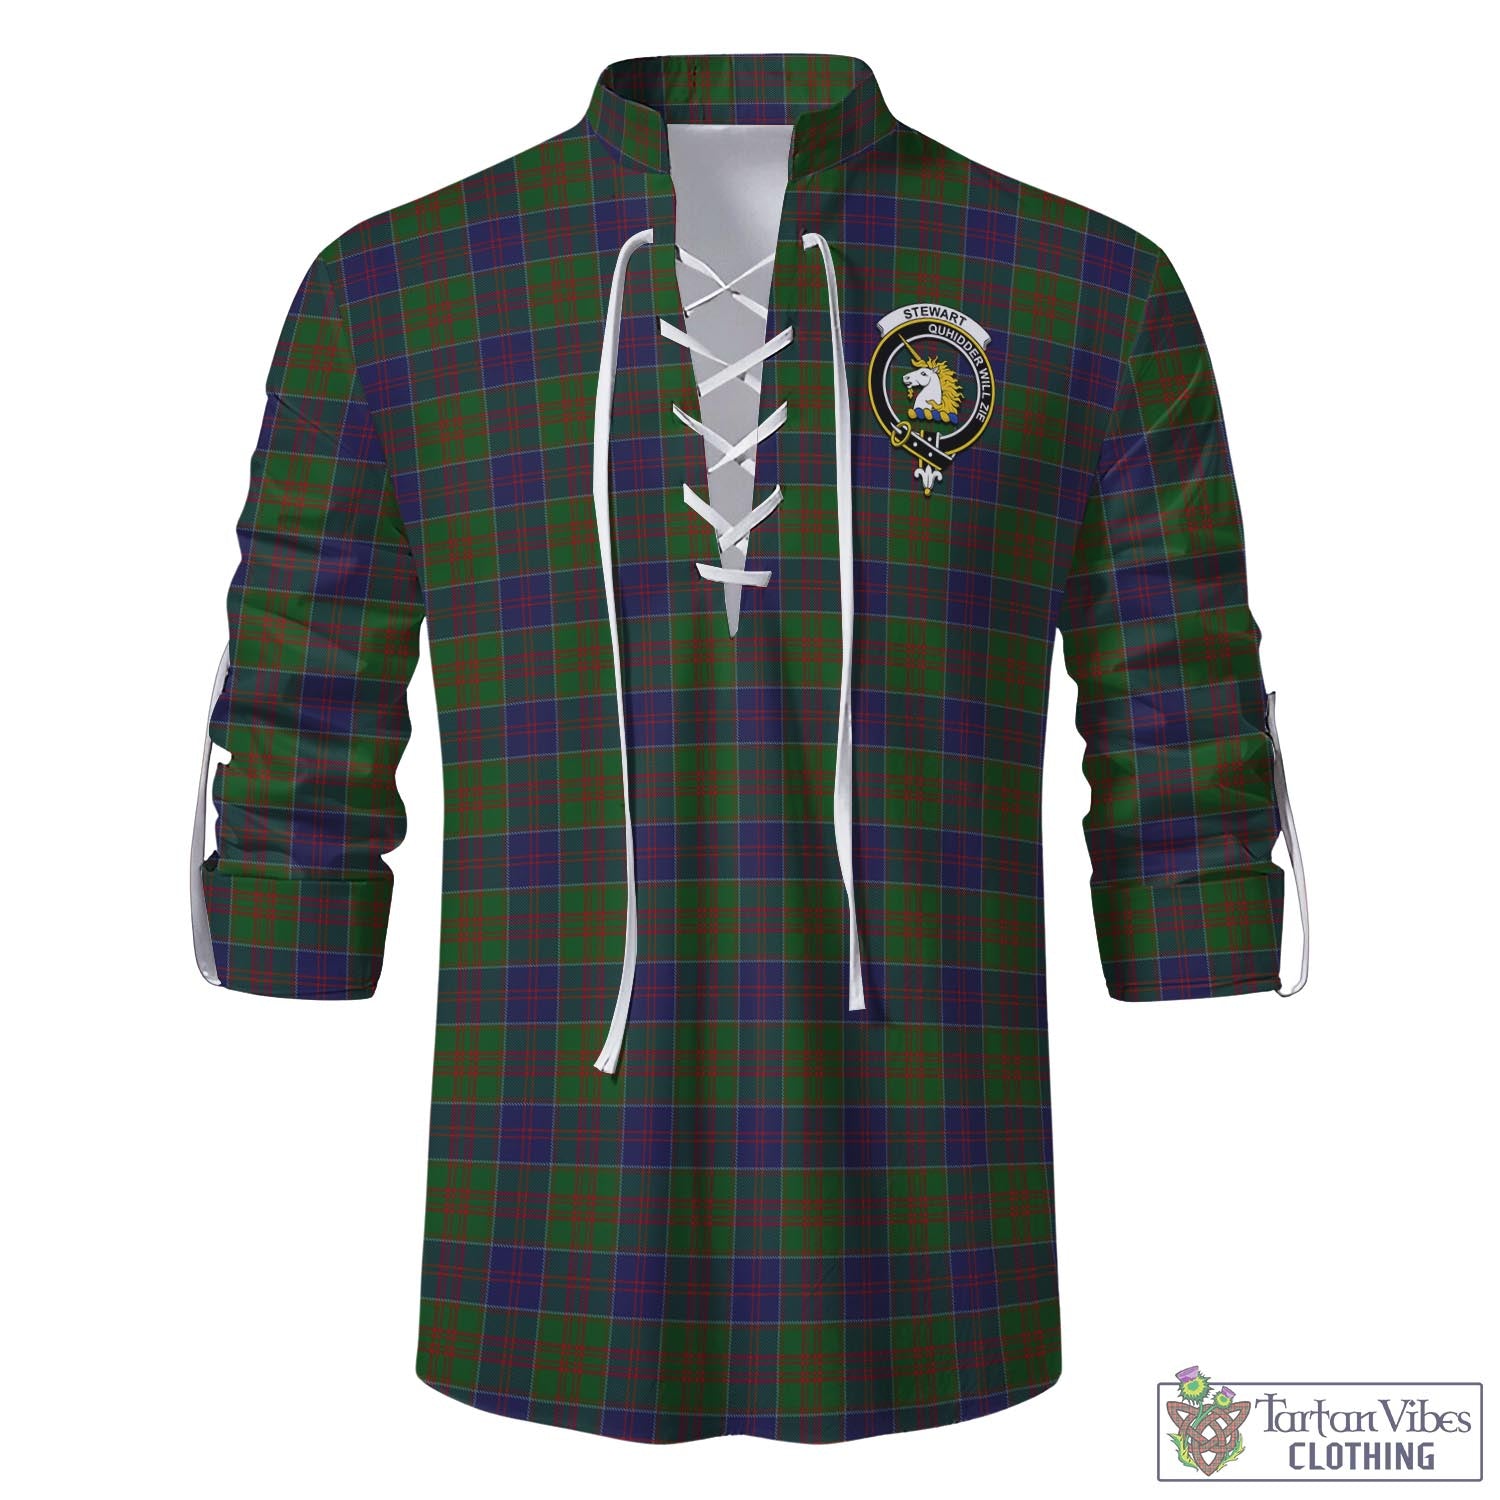 Tartan Vibes Clothing Stewart of Appin Hunting Tartan Men's Scottish Traditional Jacobite Ghillie Kilt Shirt with Family Crest